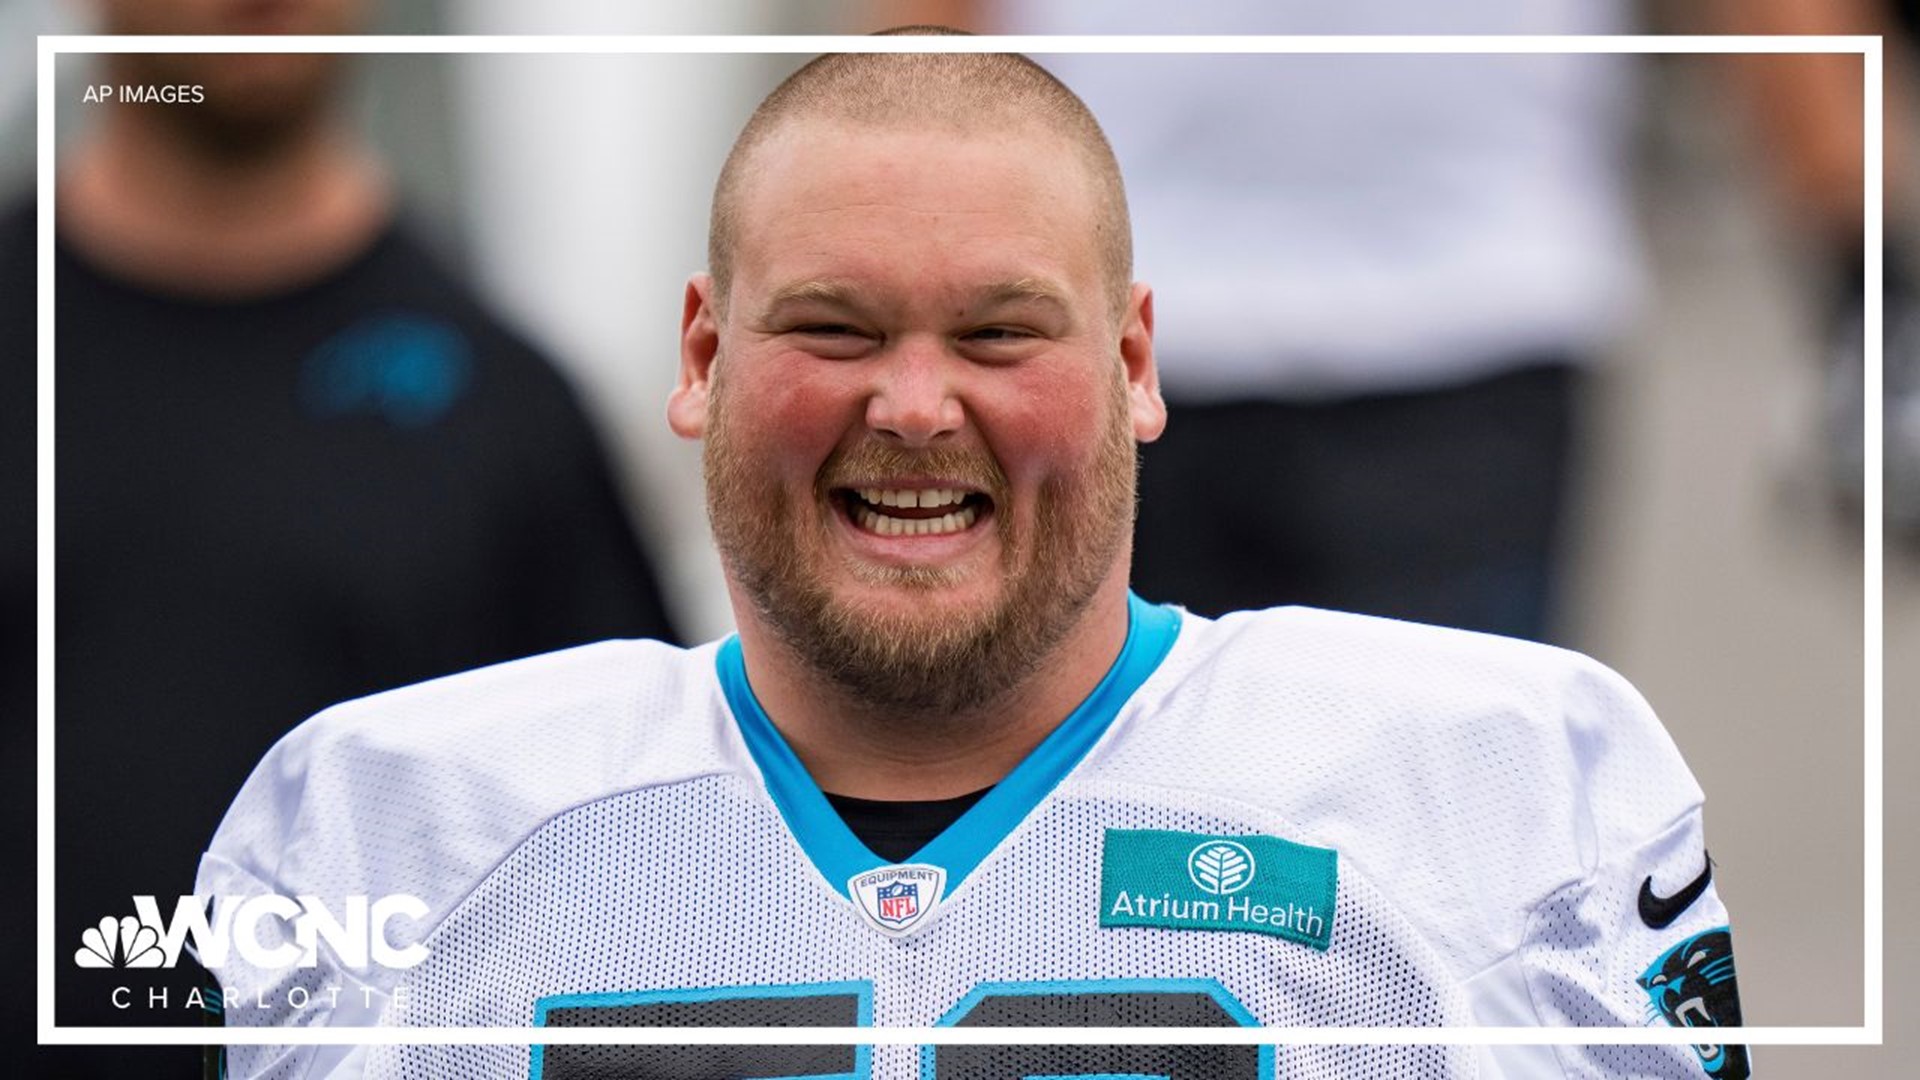 Bradley Bozeman came to Charlotte with a one-year contract. Since then, he's become a father and his family has made it their mission to help the local community.